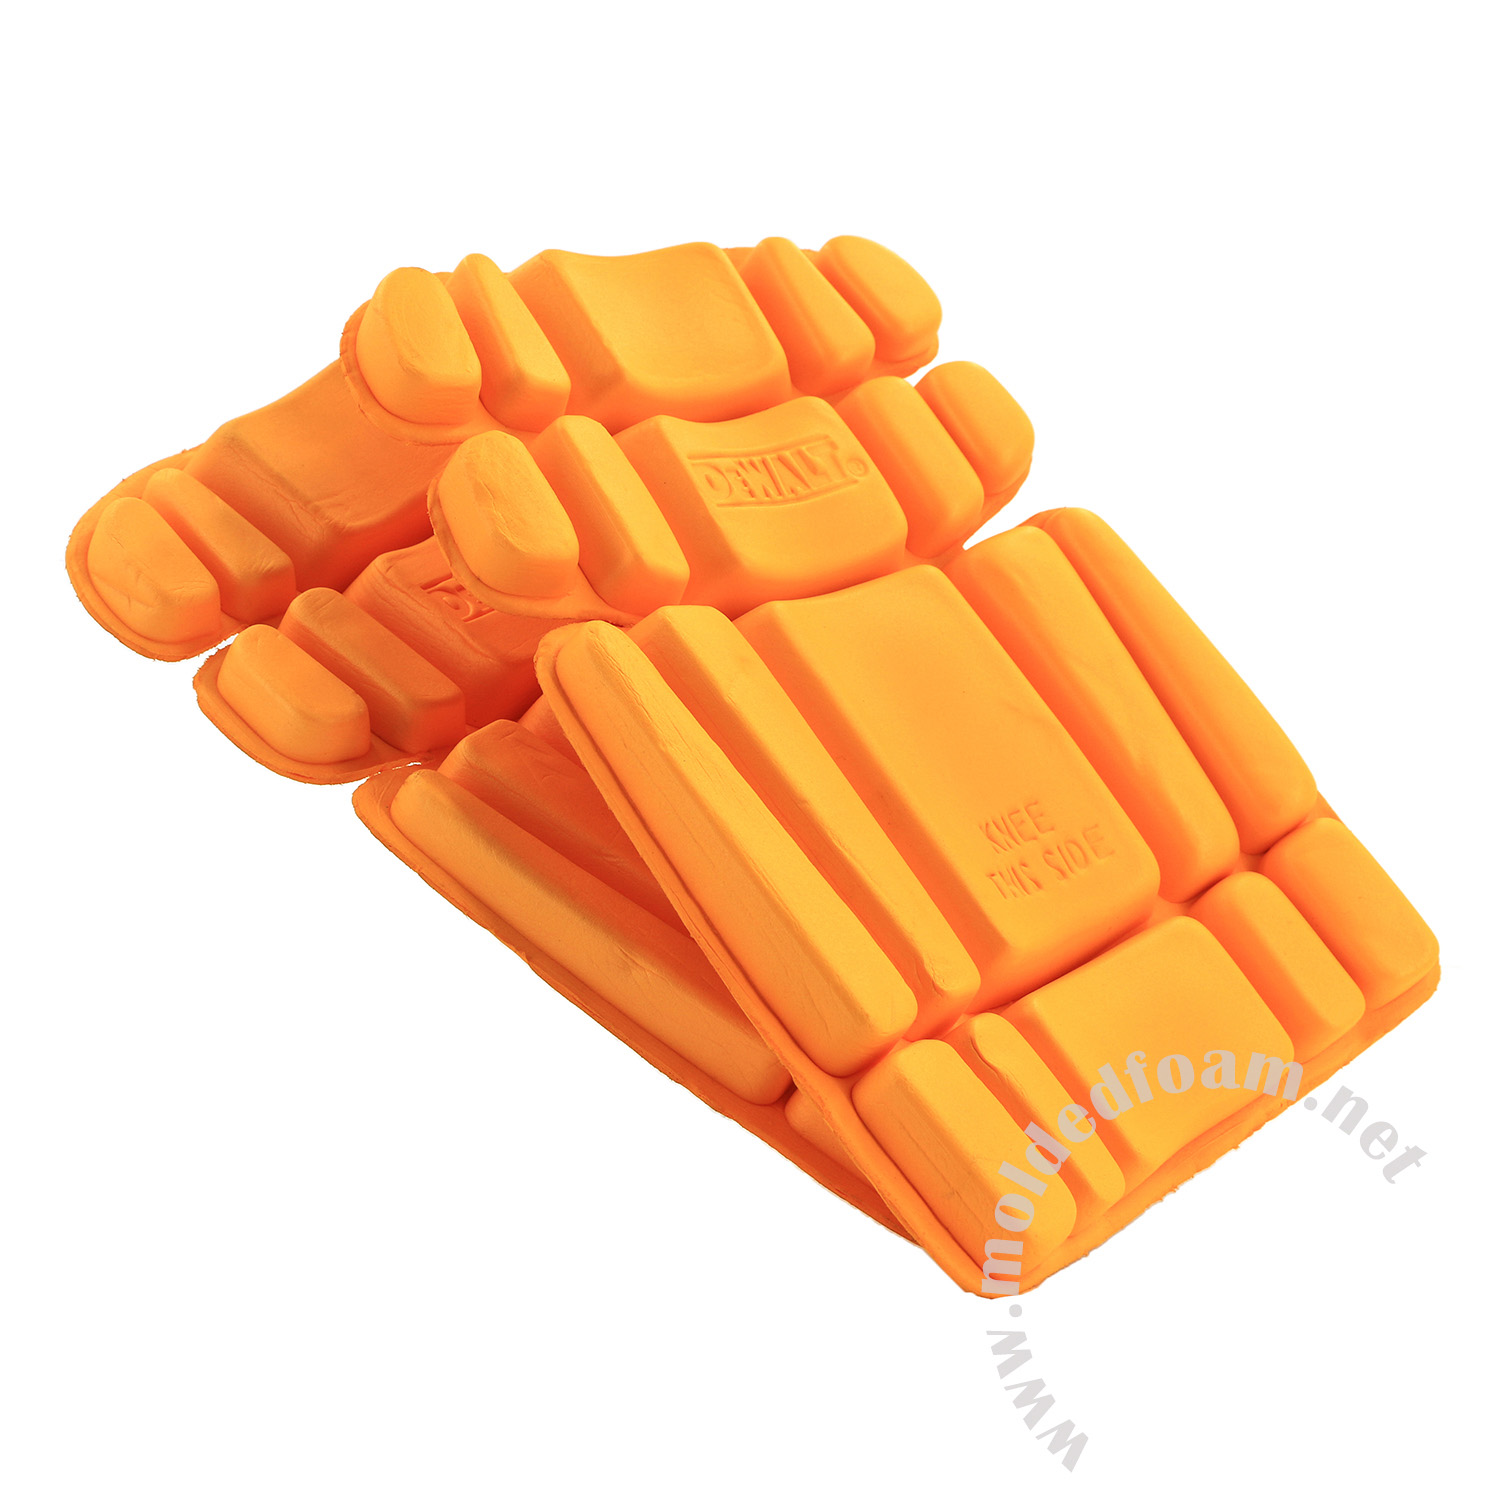 Heat compression flexible molding foam for acu pants knee pad inserts in  orange color